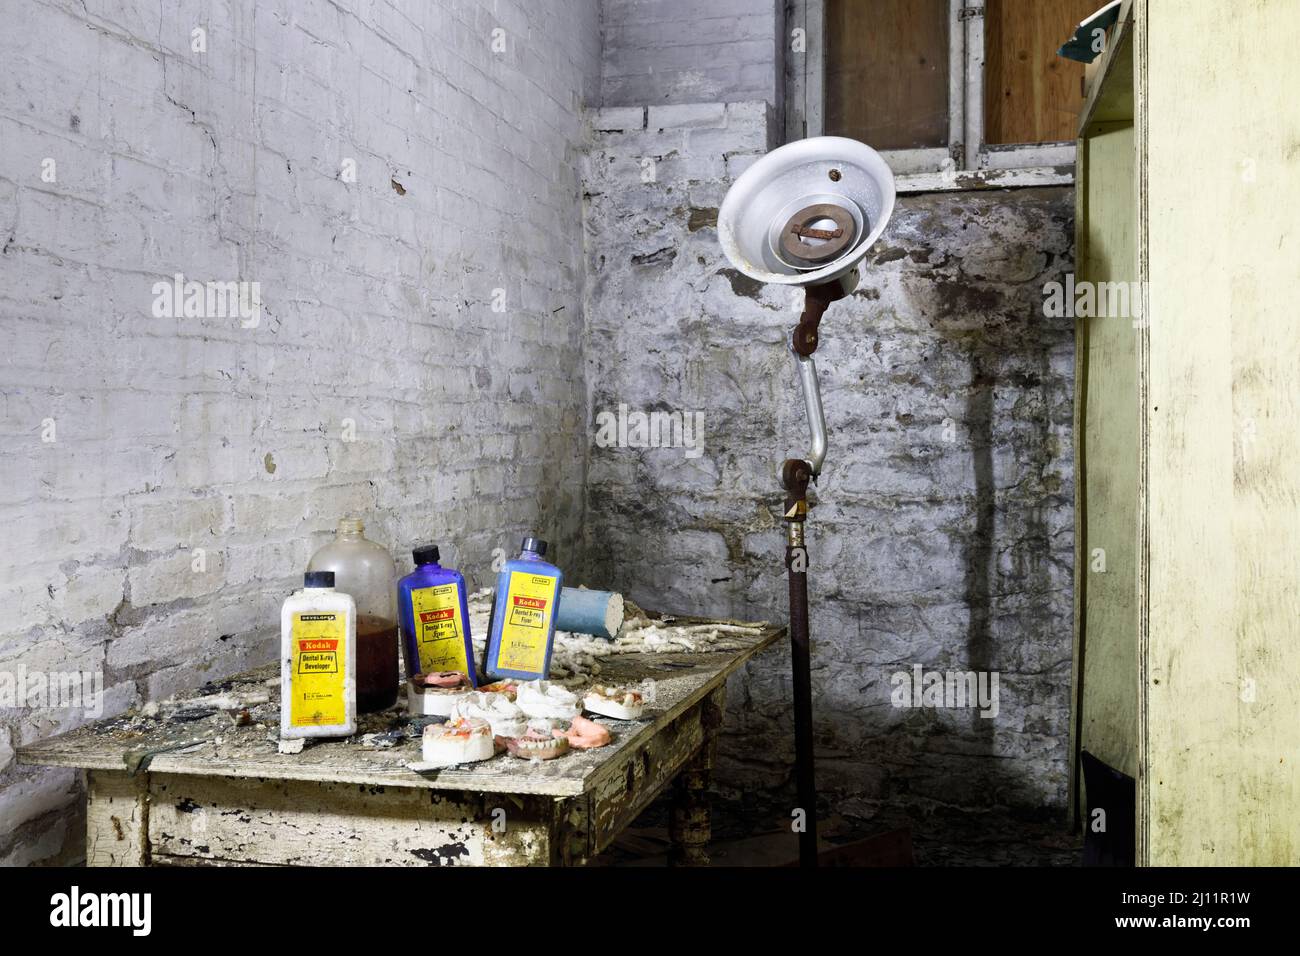 Dental casts, x-ray chemicals, dentures and an old dental lamp inside the basement of an abandoned asylum. Stock Photo